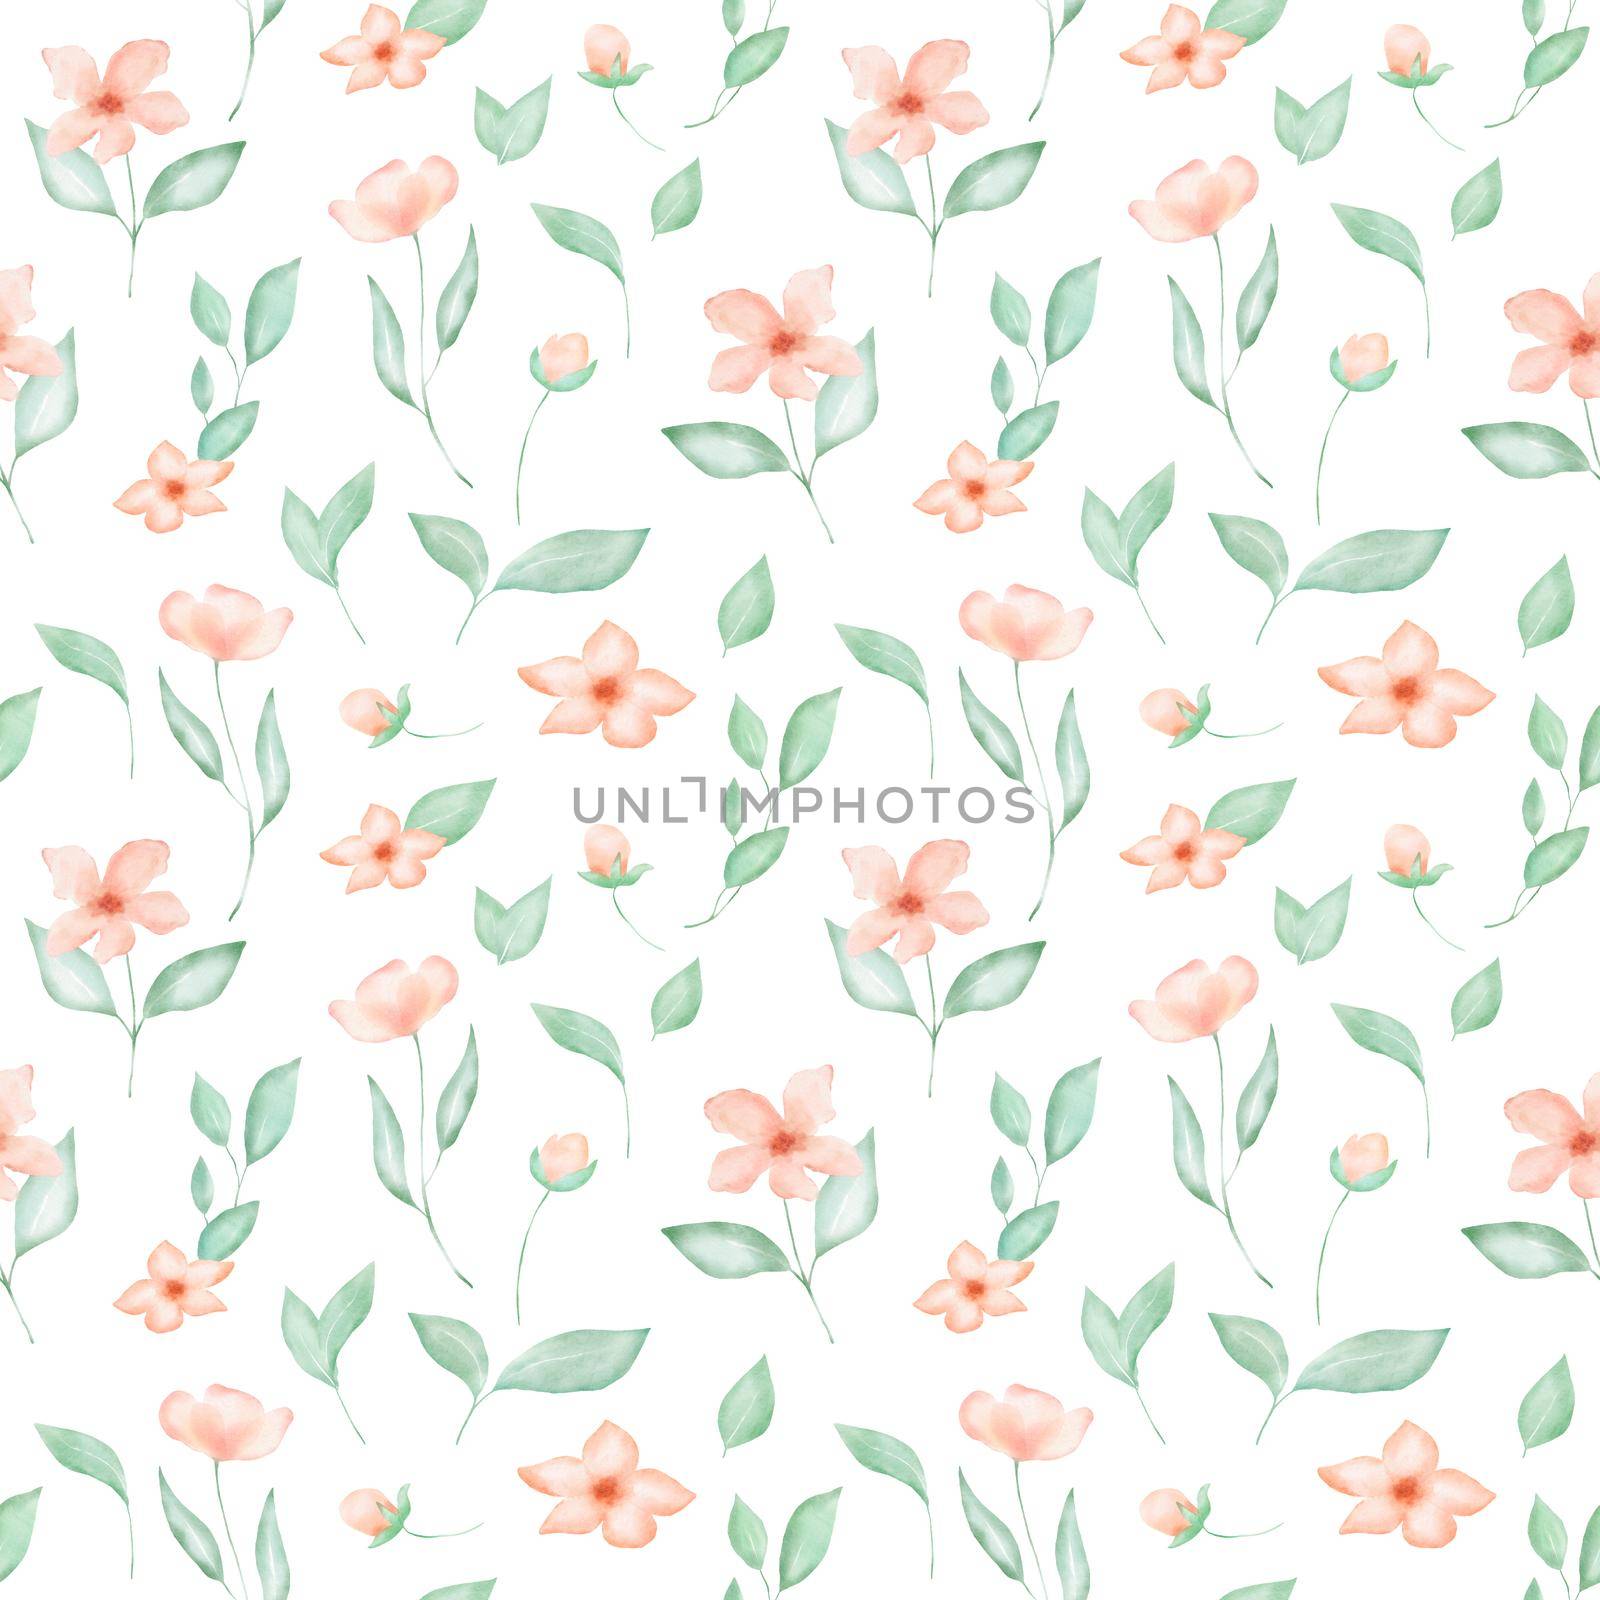 Watercolor floral seamless pattern with pink flowers and leaves. Spring colorful decor with illustrations on white background by ElenaPlatova